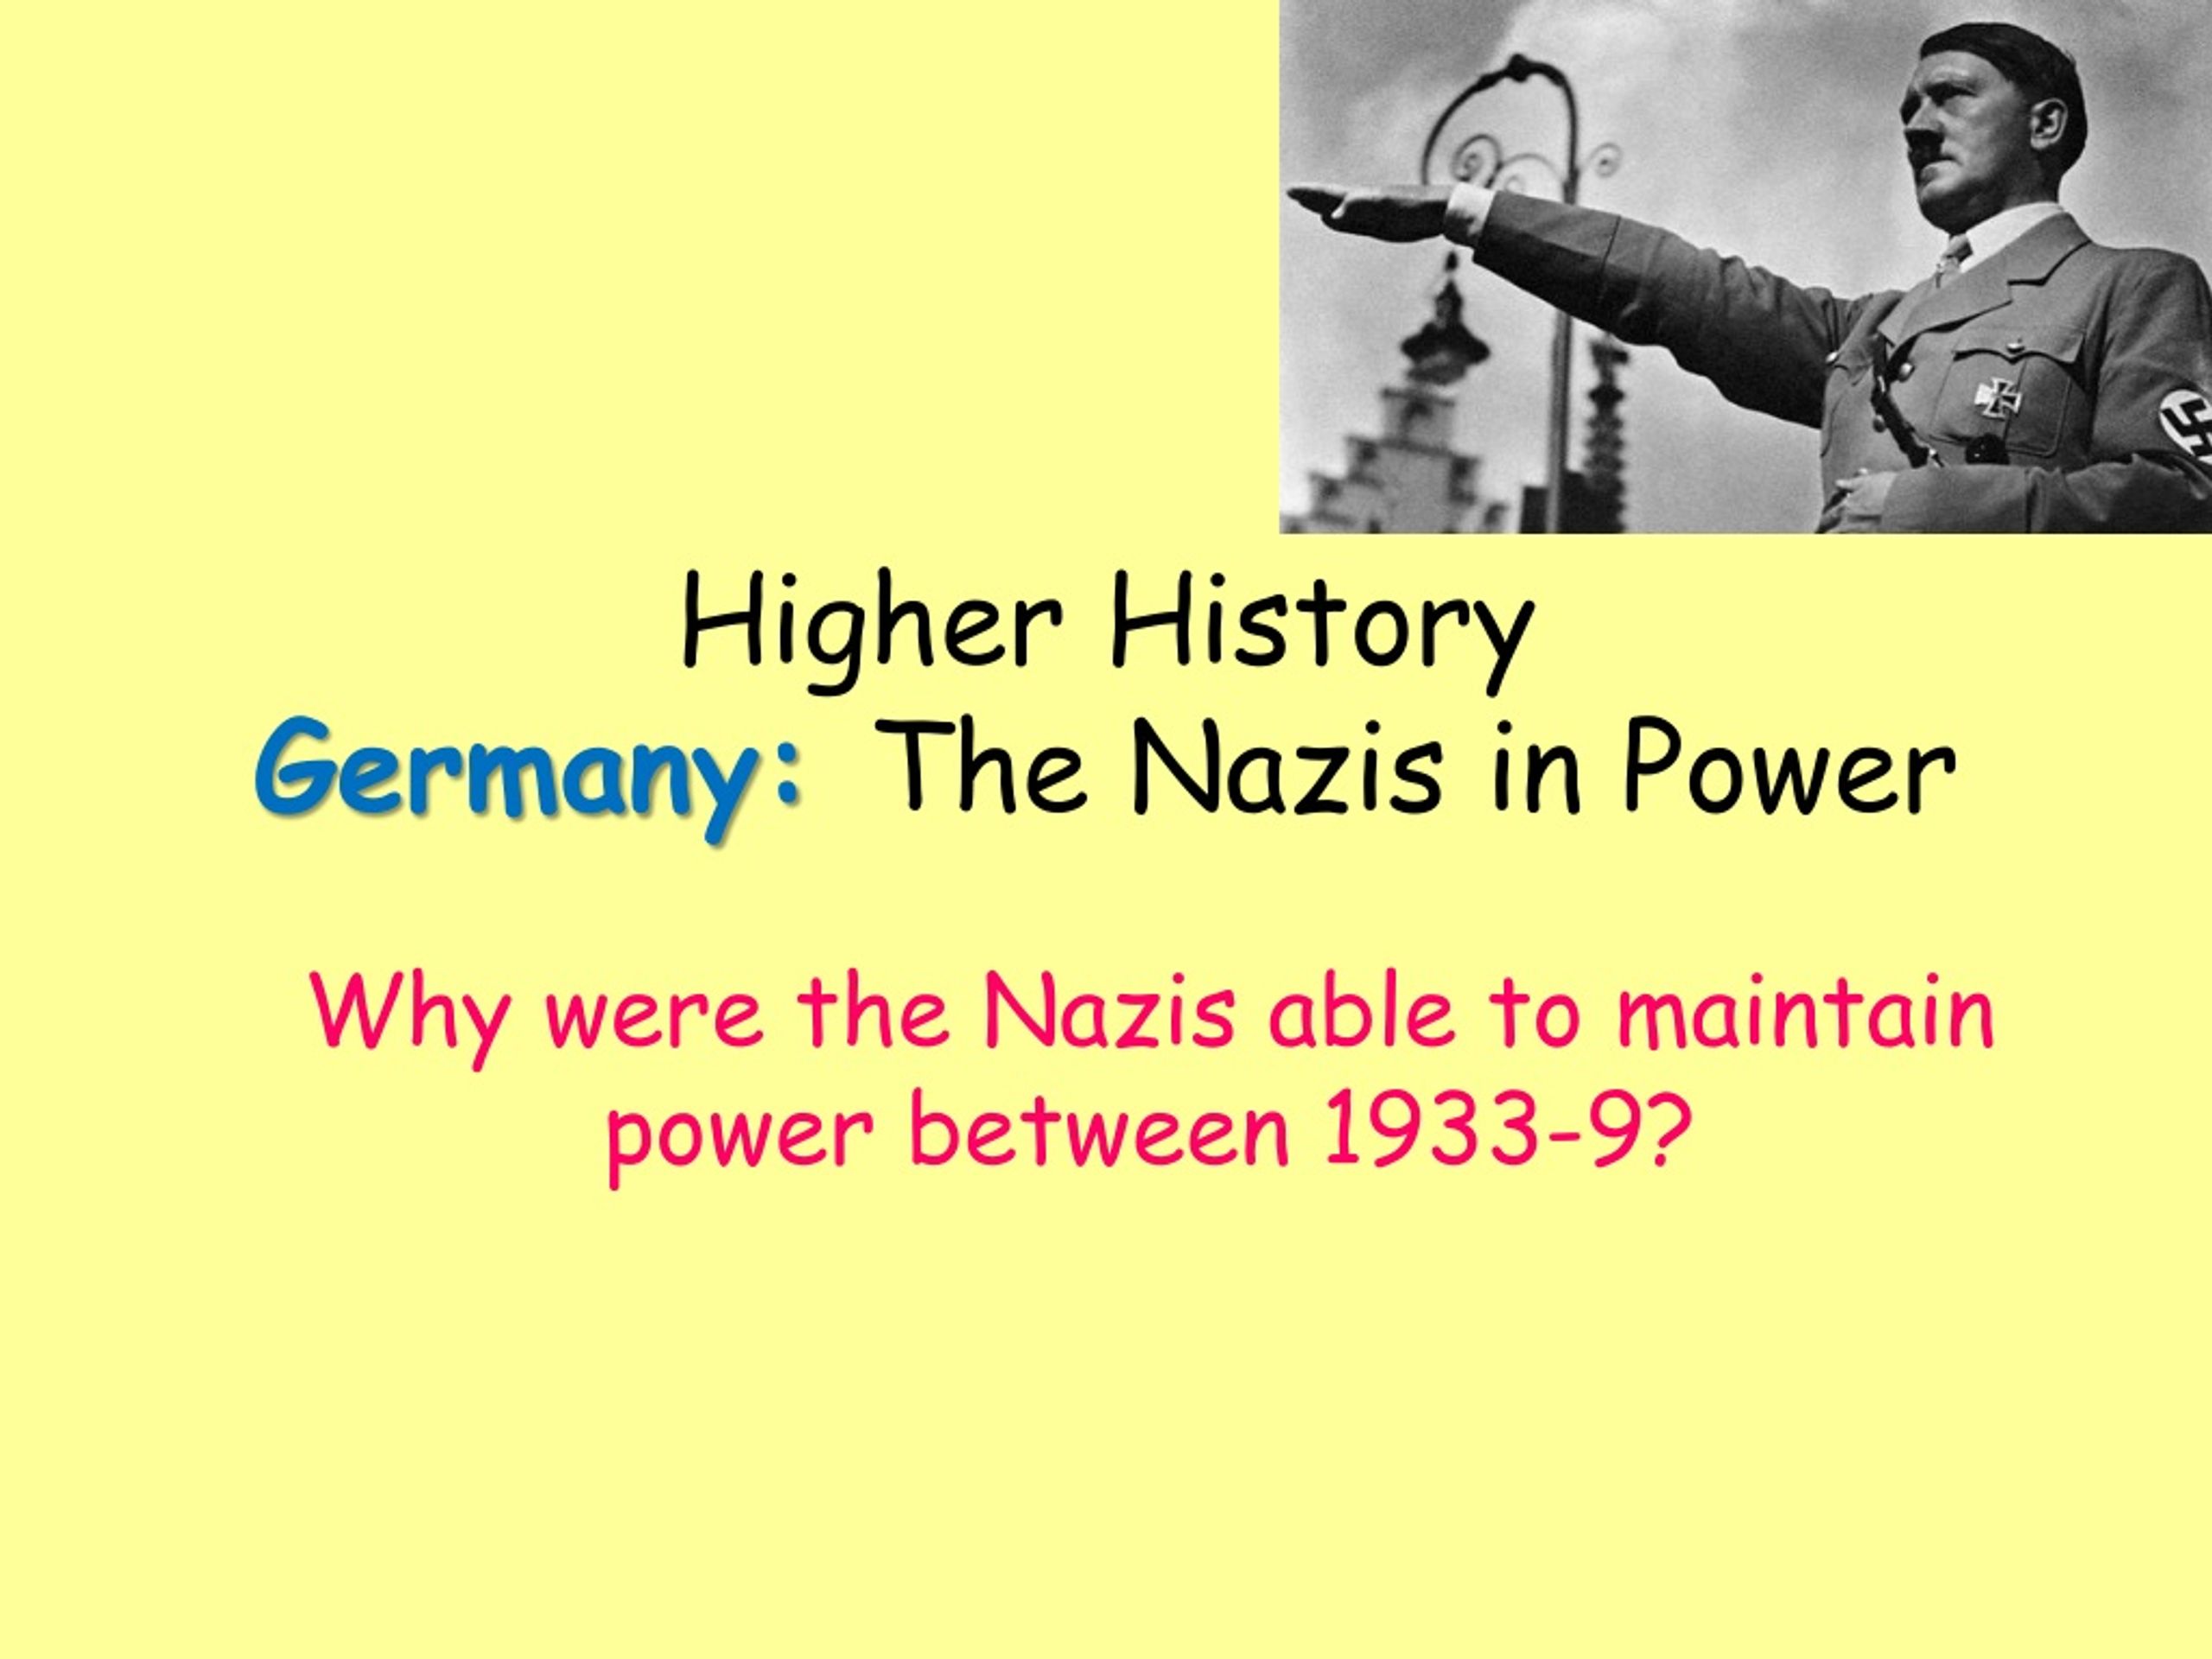 PPT Higher History Germany The Nazis In Power PowerPoint